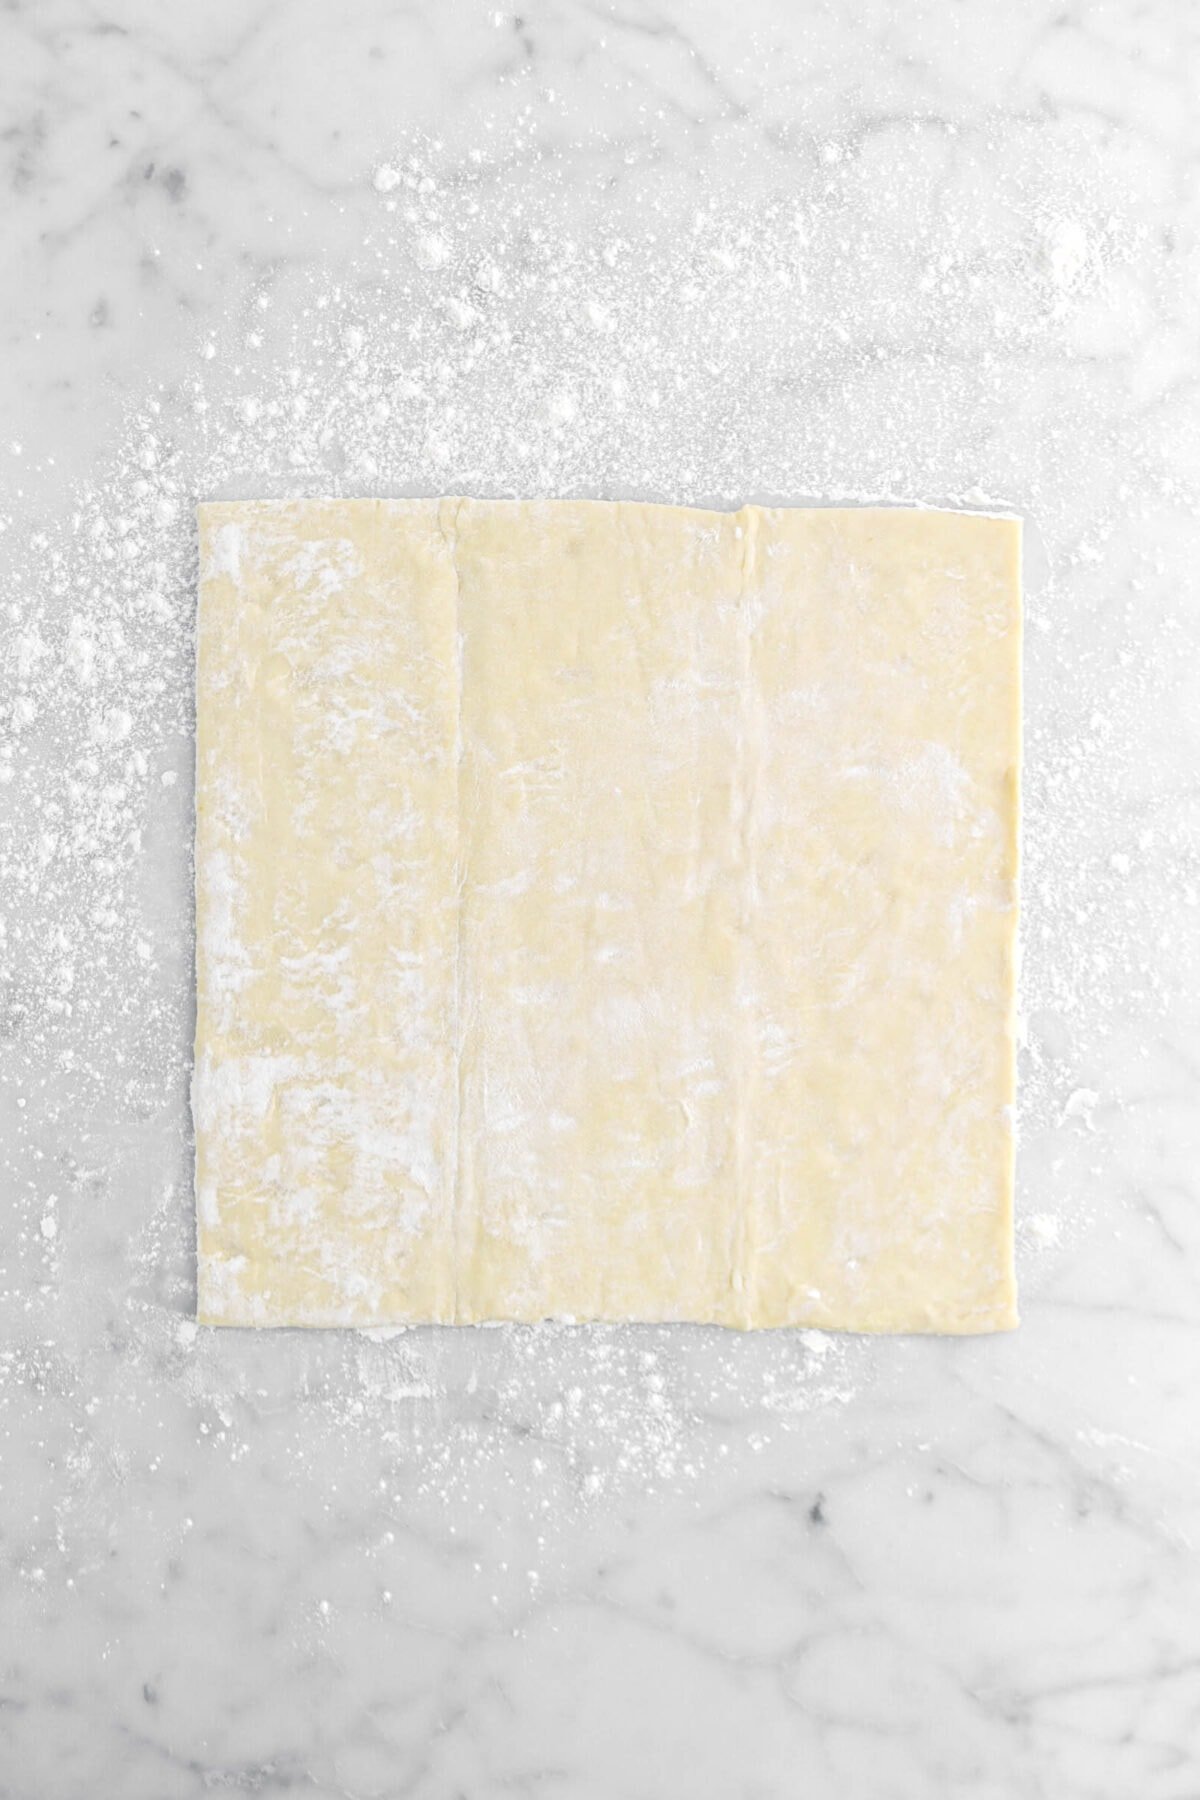 puff pastry dough on floured surface.